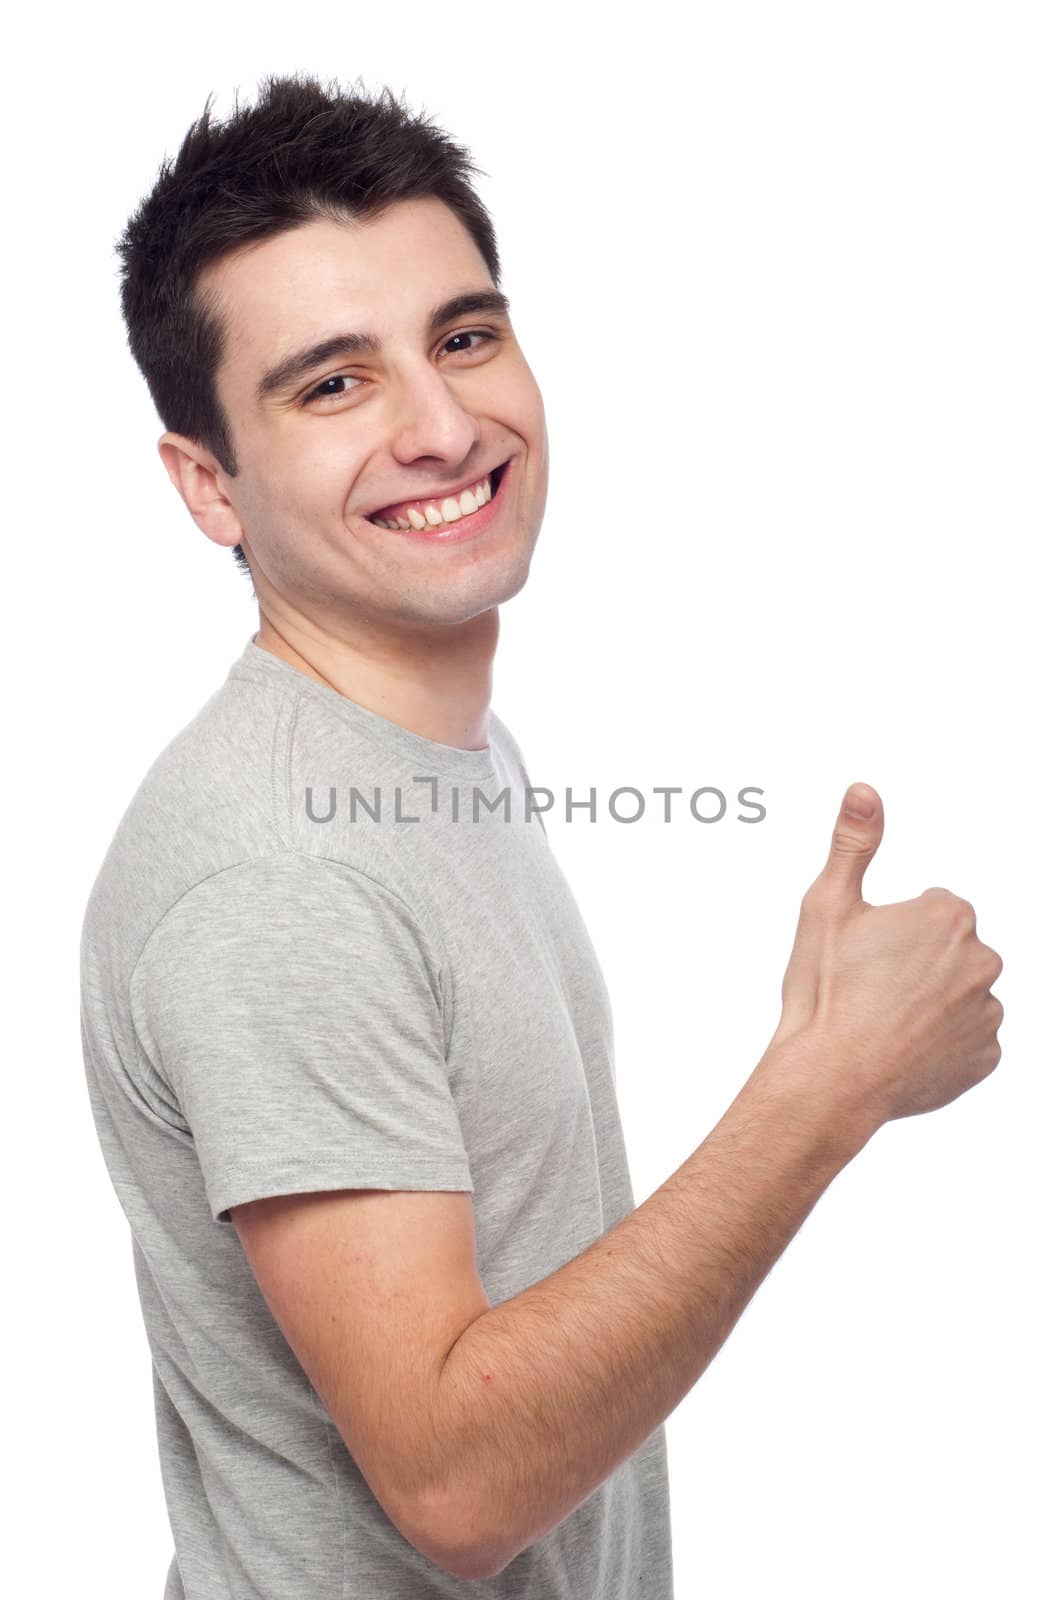 handsome young man with thumbs up on an isolated white background